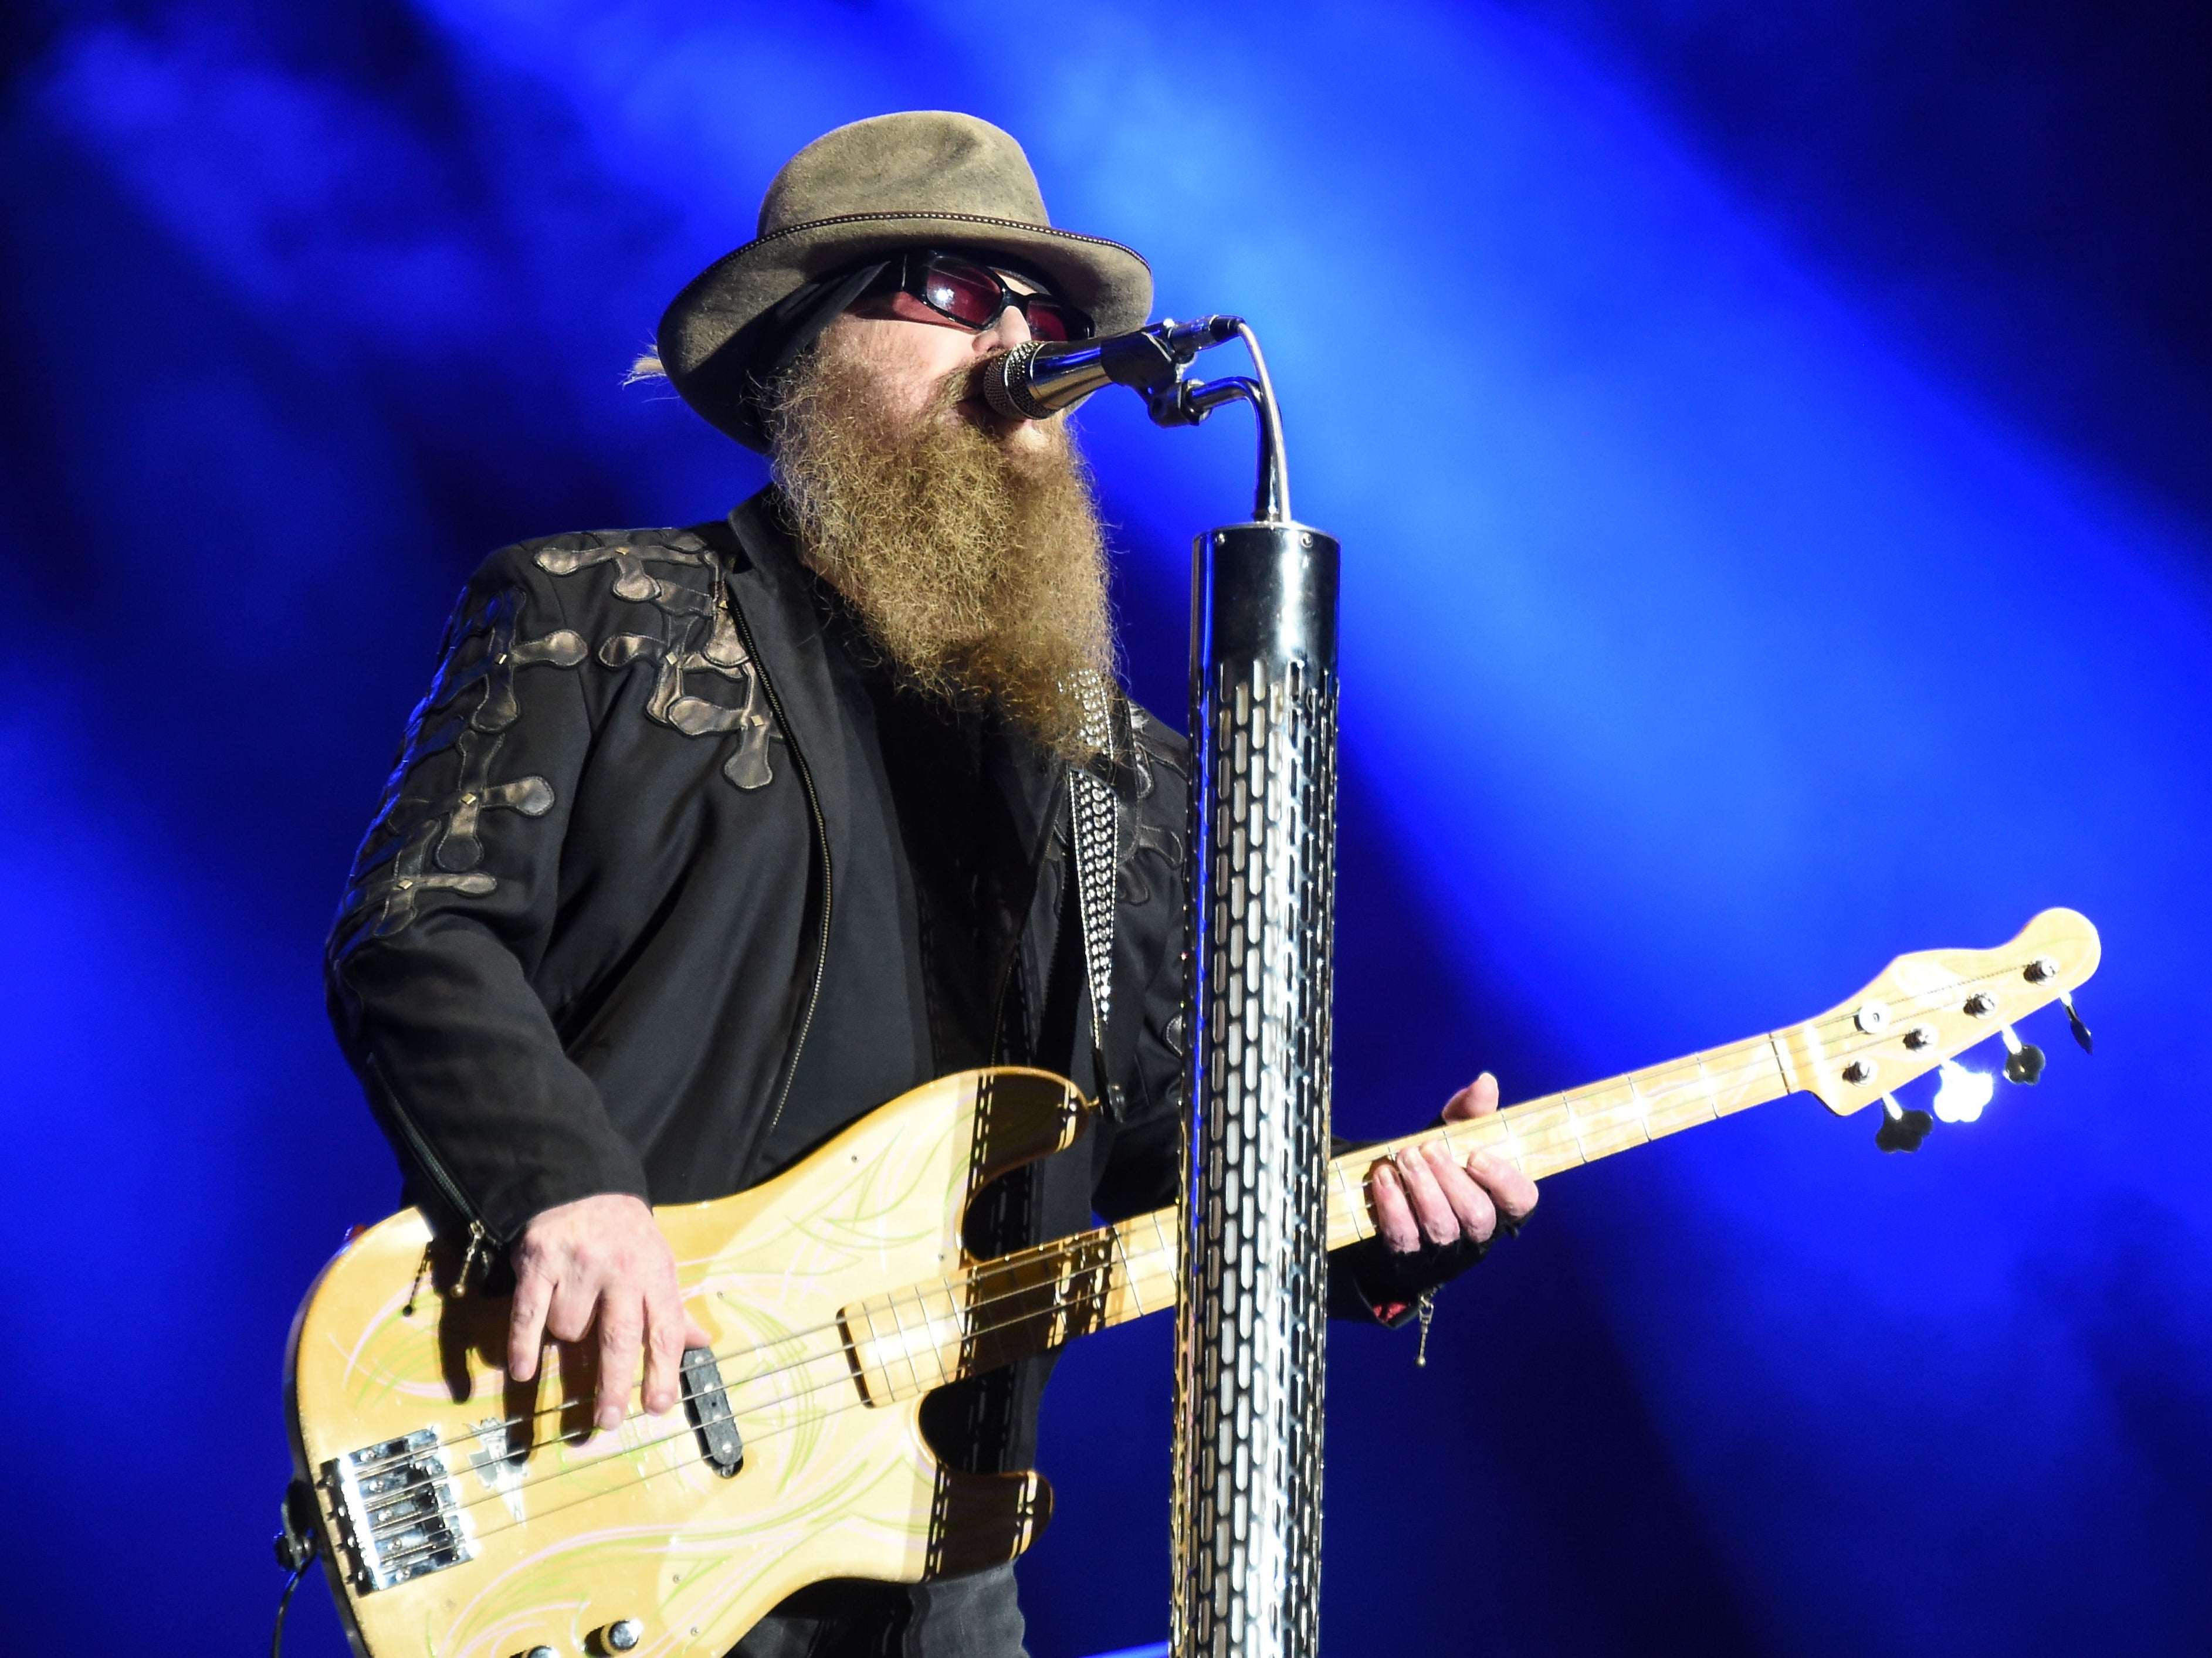 Dusty Hill of ZZ Top performs during the Eurockeennes rock music festival on 3 July 2016 in Belfort, France